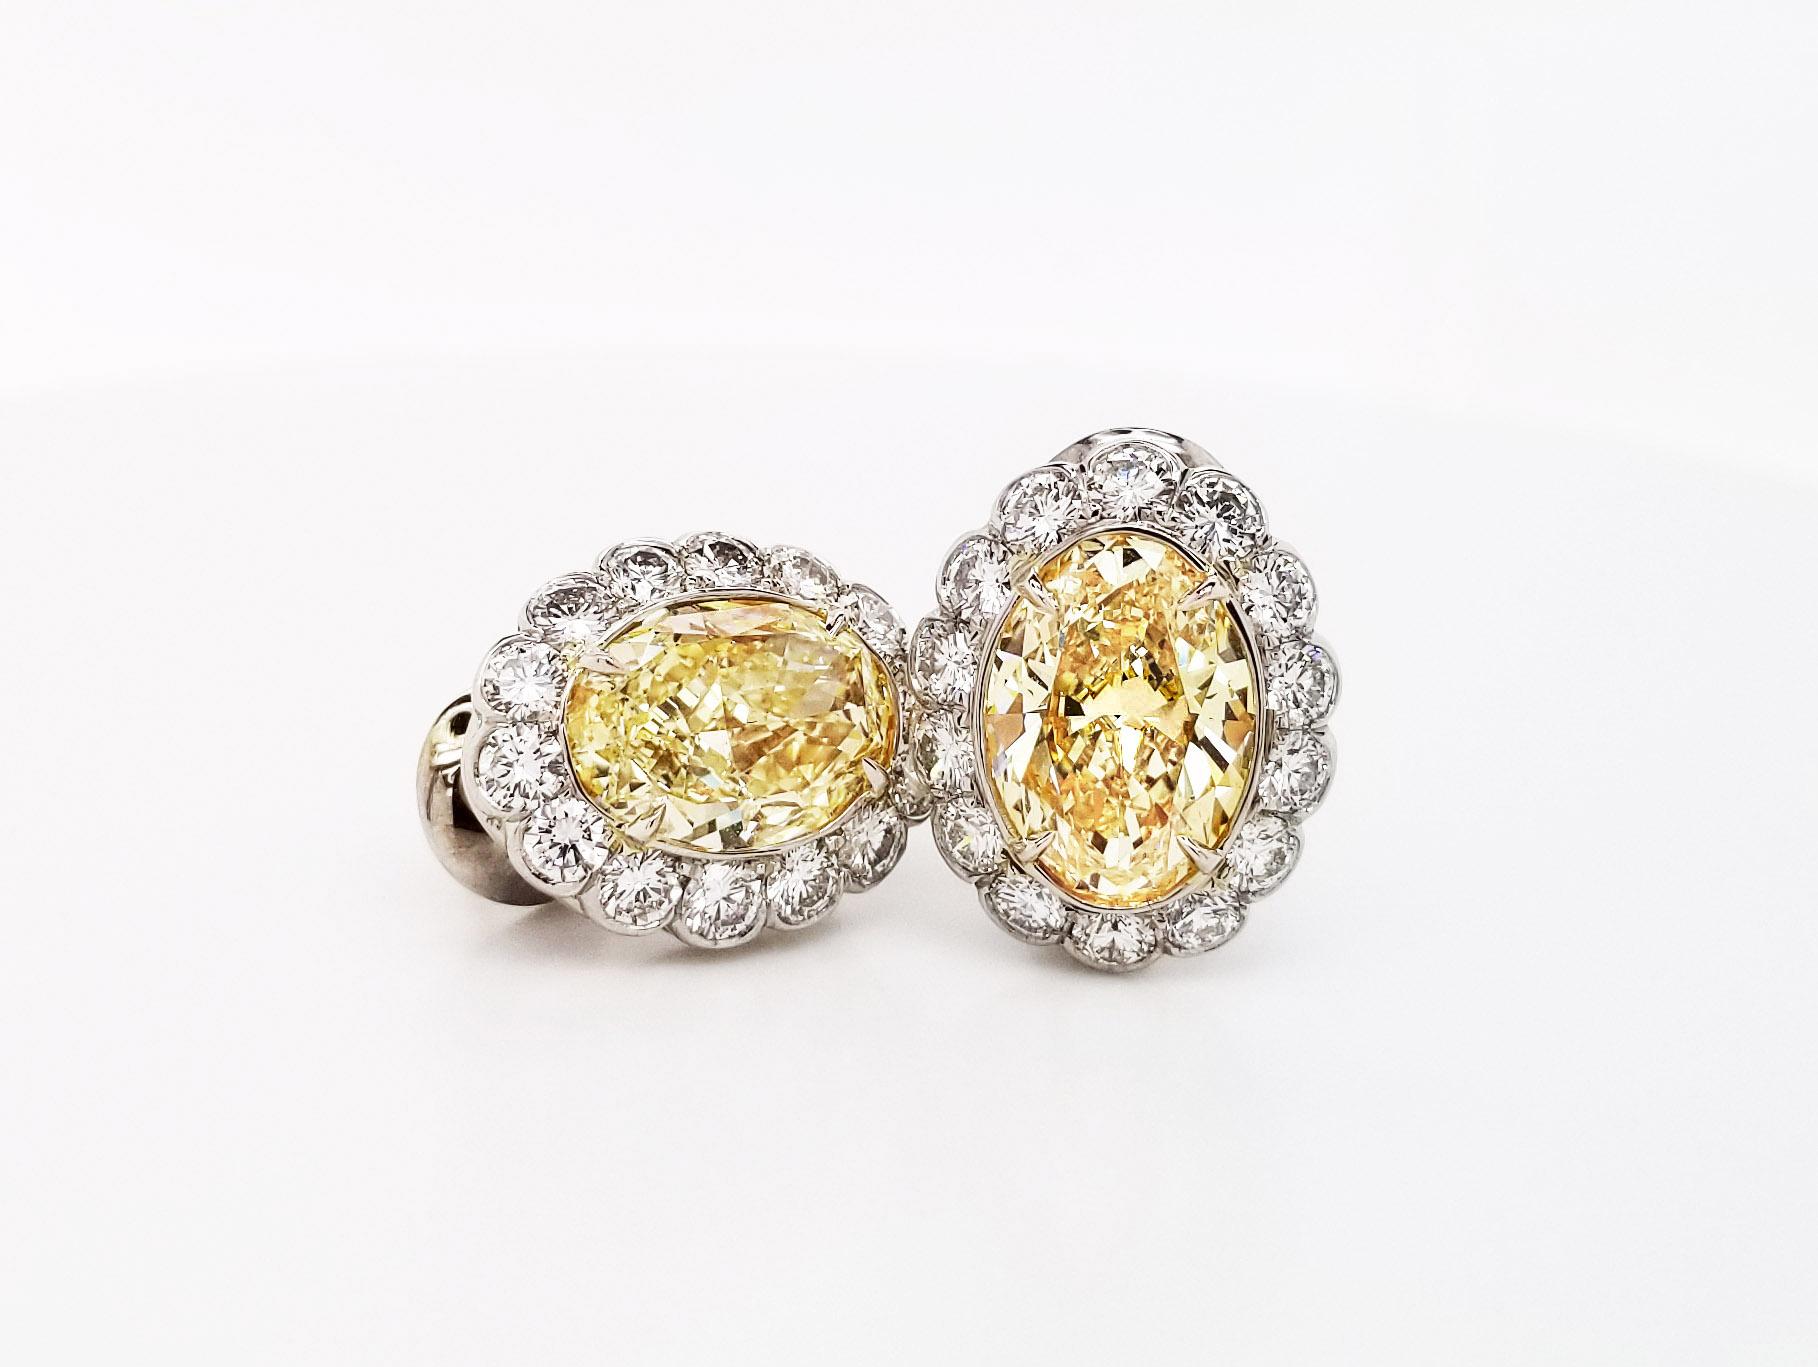 From Scarselli's collection, featuring 4.00 carats FancyYellow Oval Cut Diamonds VVS-VS clarity with GIA certificates (See certificate' pictures for detailed stones' information). The Yellow Diamonds are simpleness beautiful set up in platinum